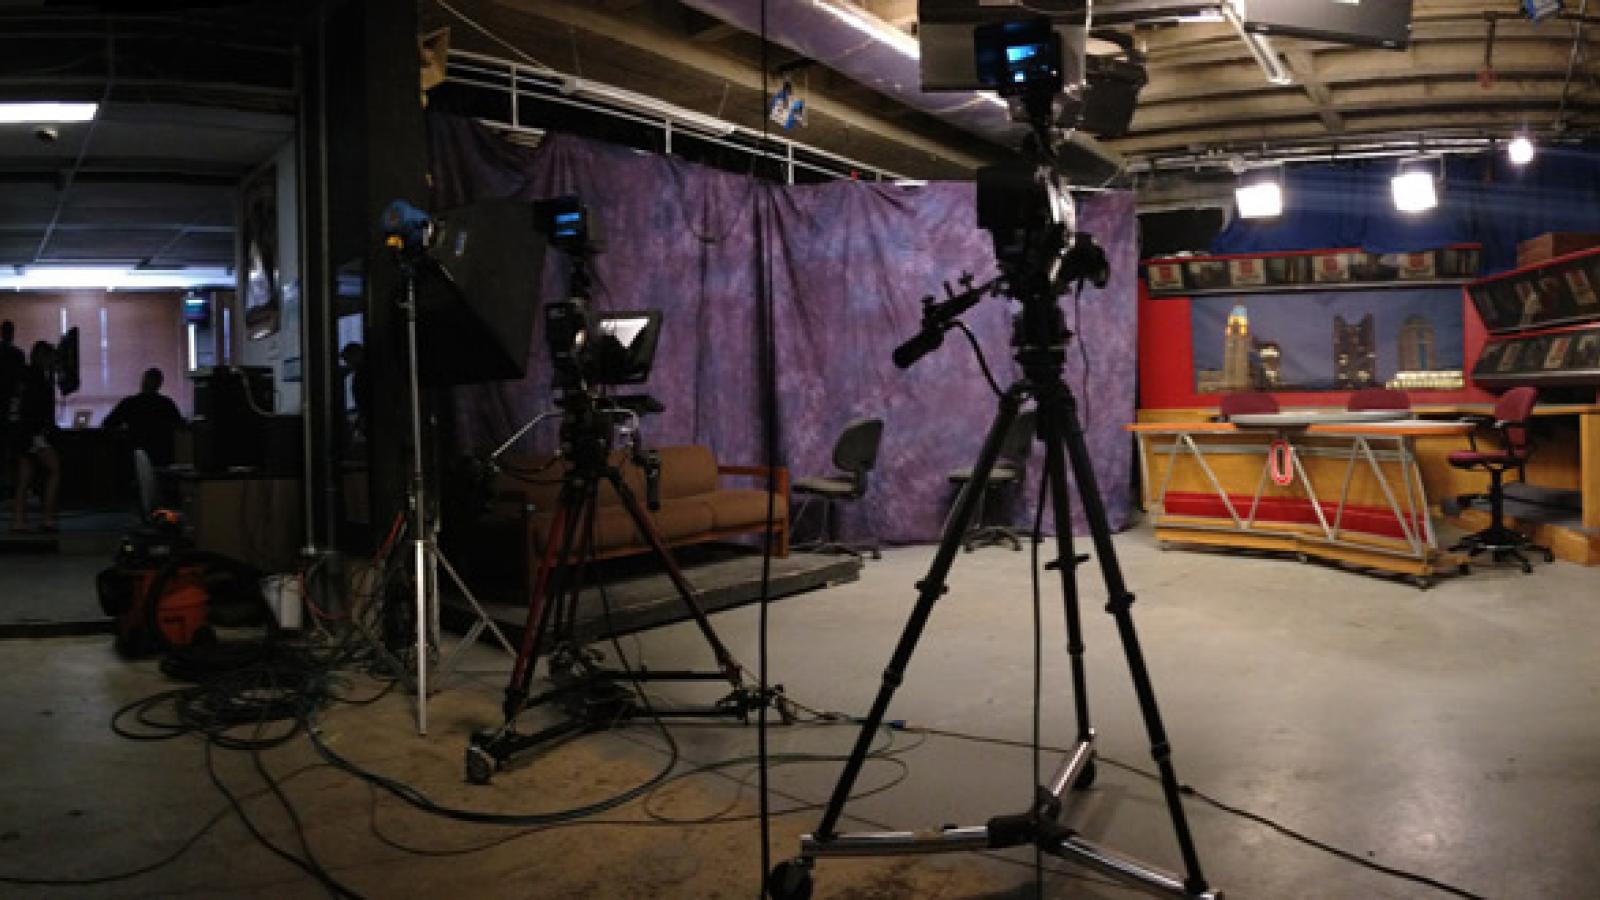 A production set for media production minors.